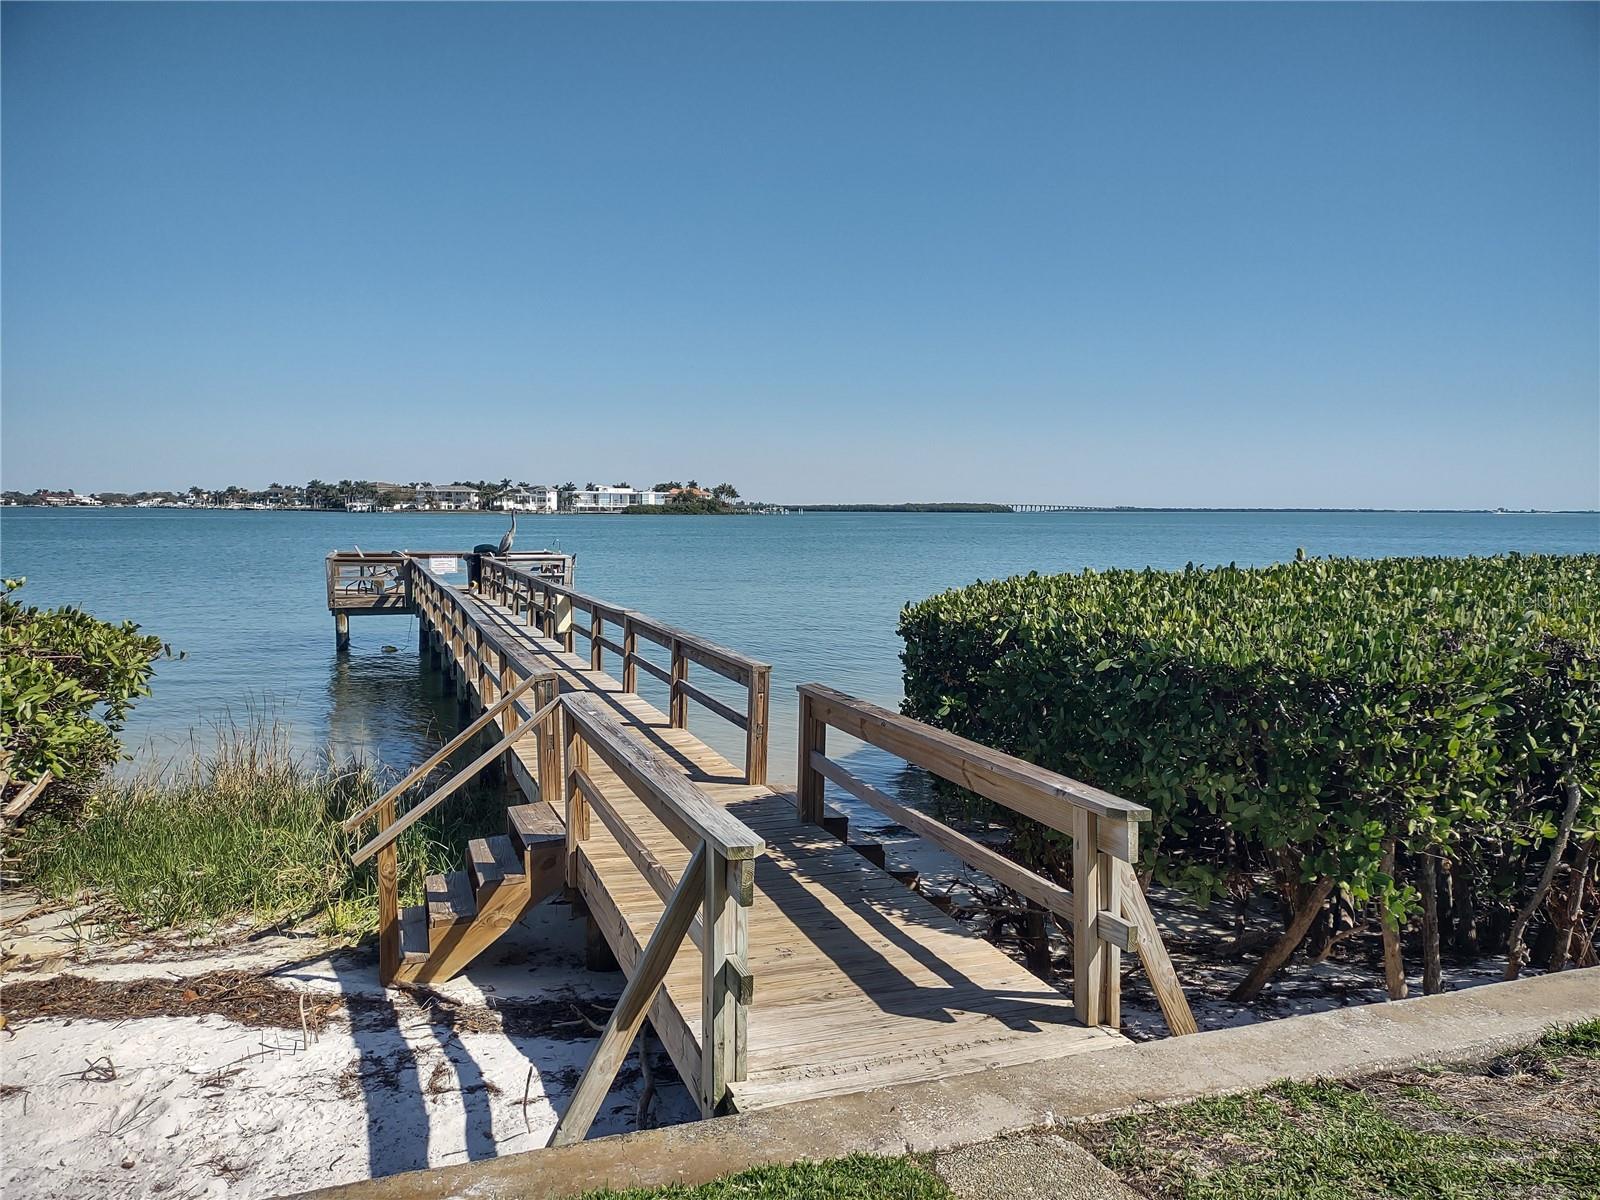 Fishing pier on shoreline by swimming pool area